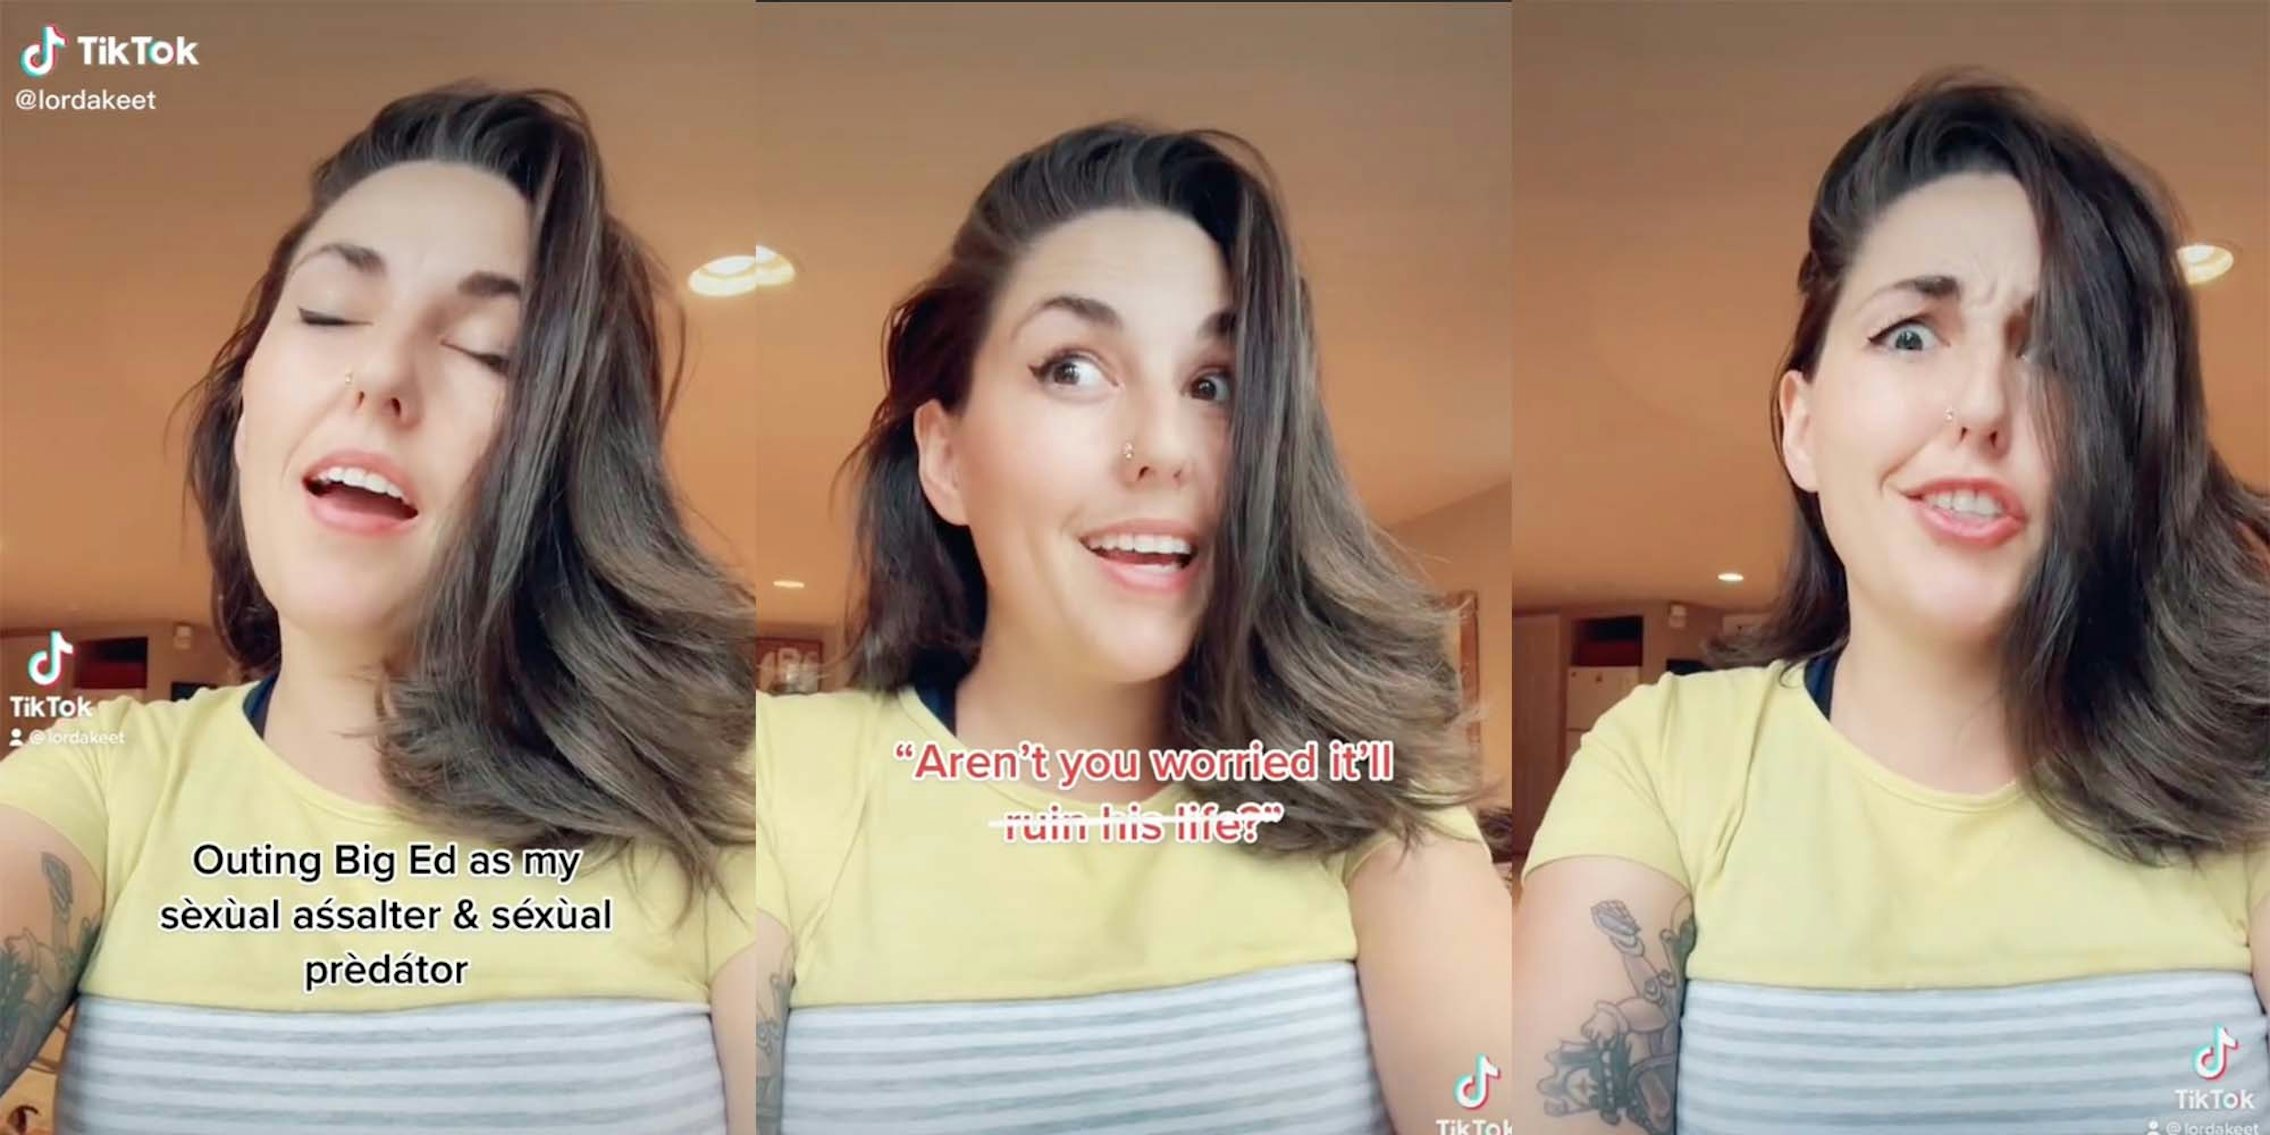 In a TikTok, Lorelei Clemens says that TLC's Big Ed sexually assaulted her.